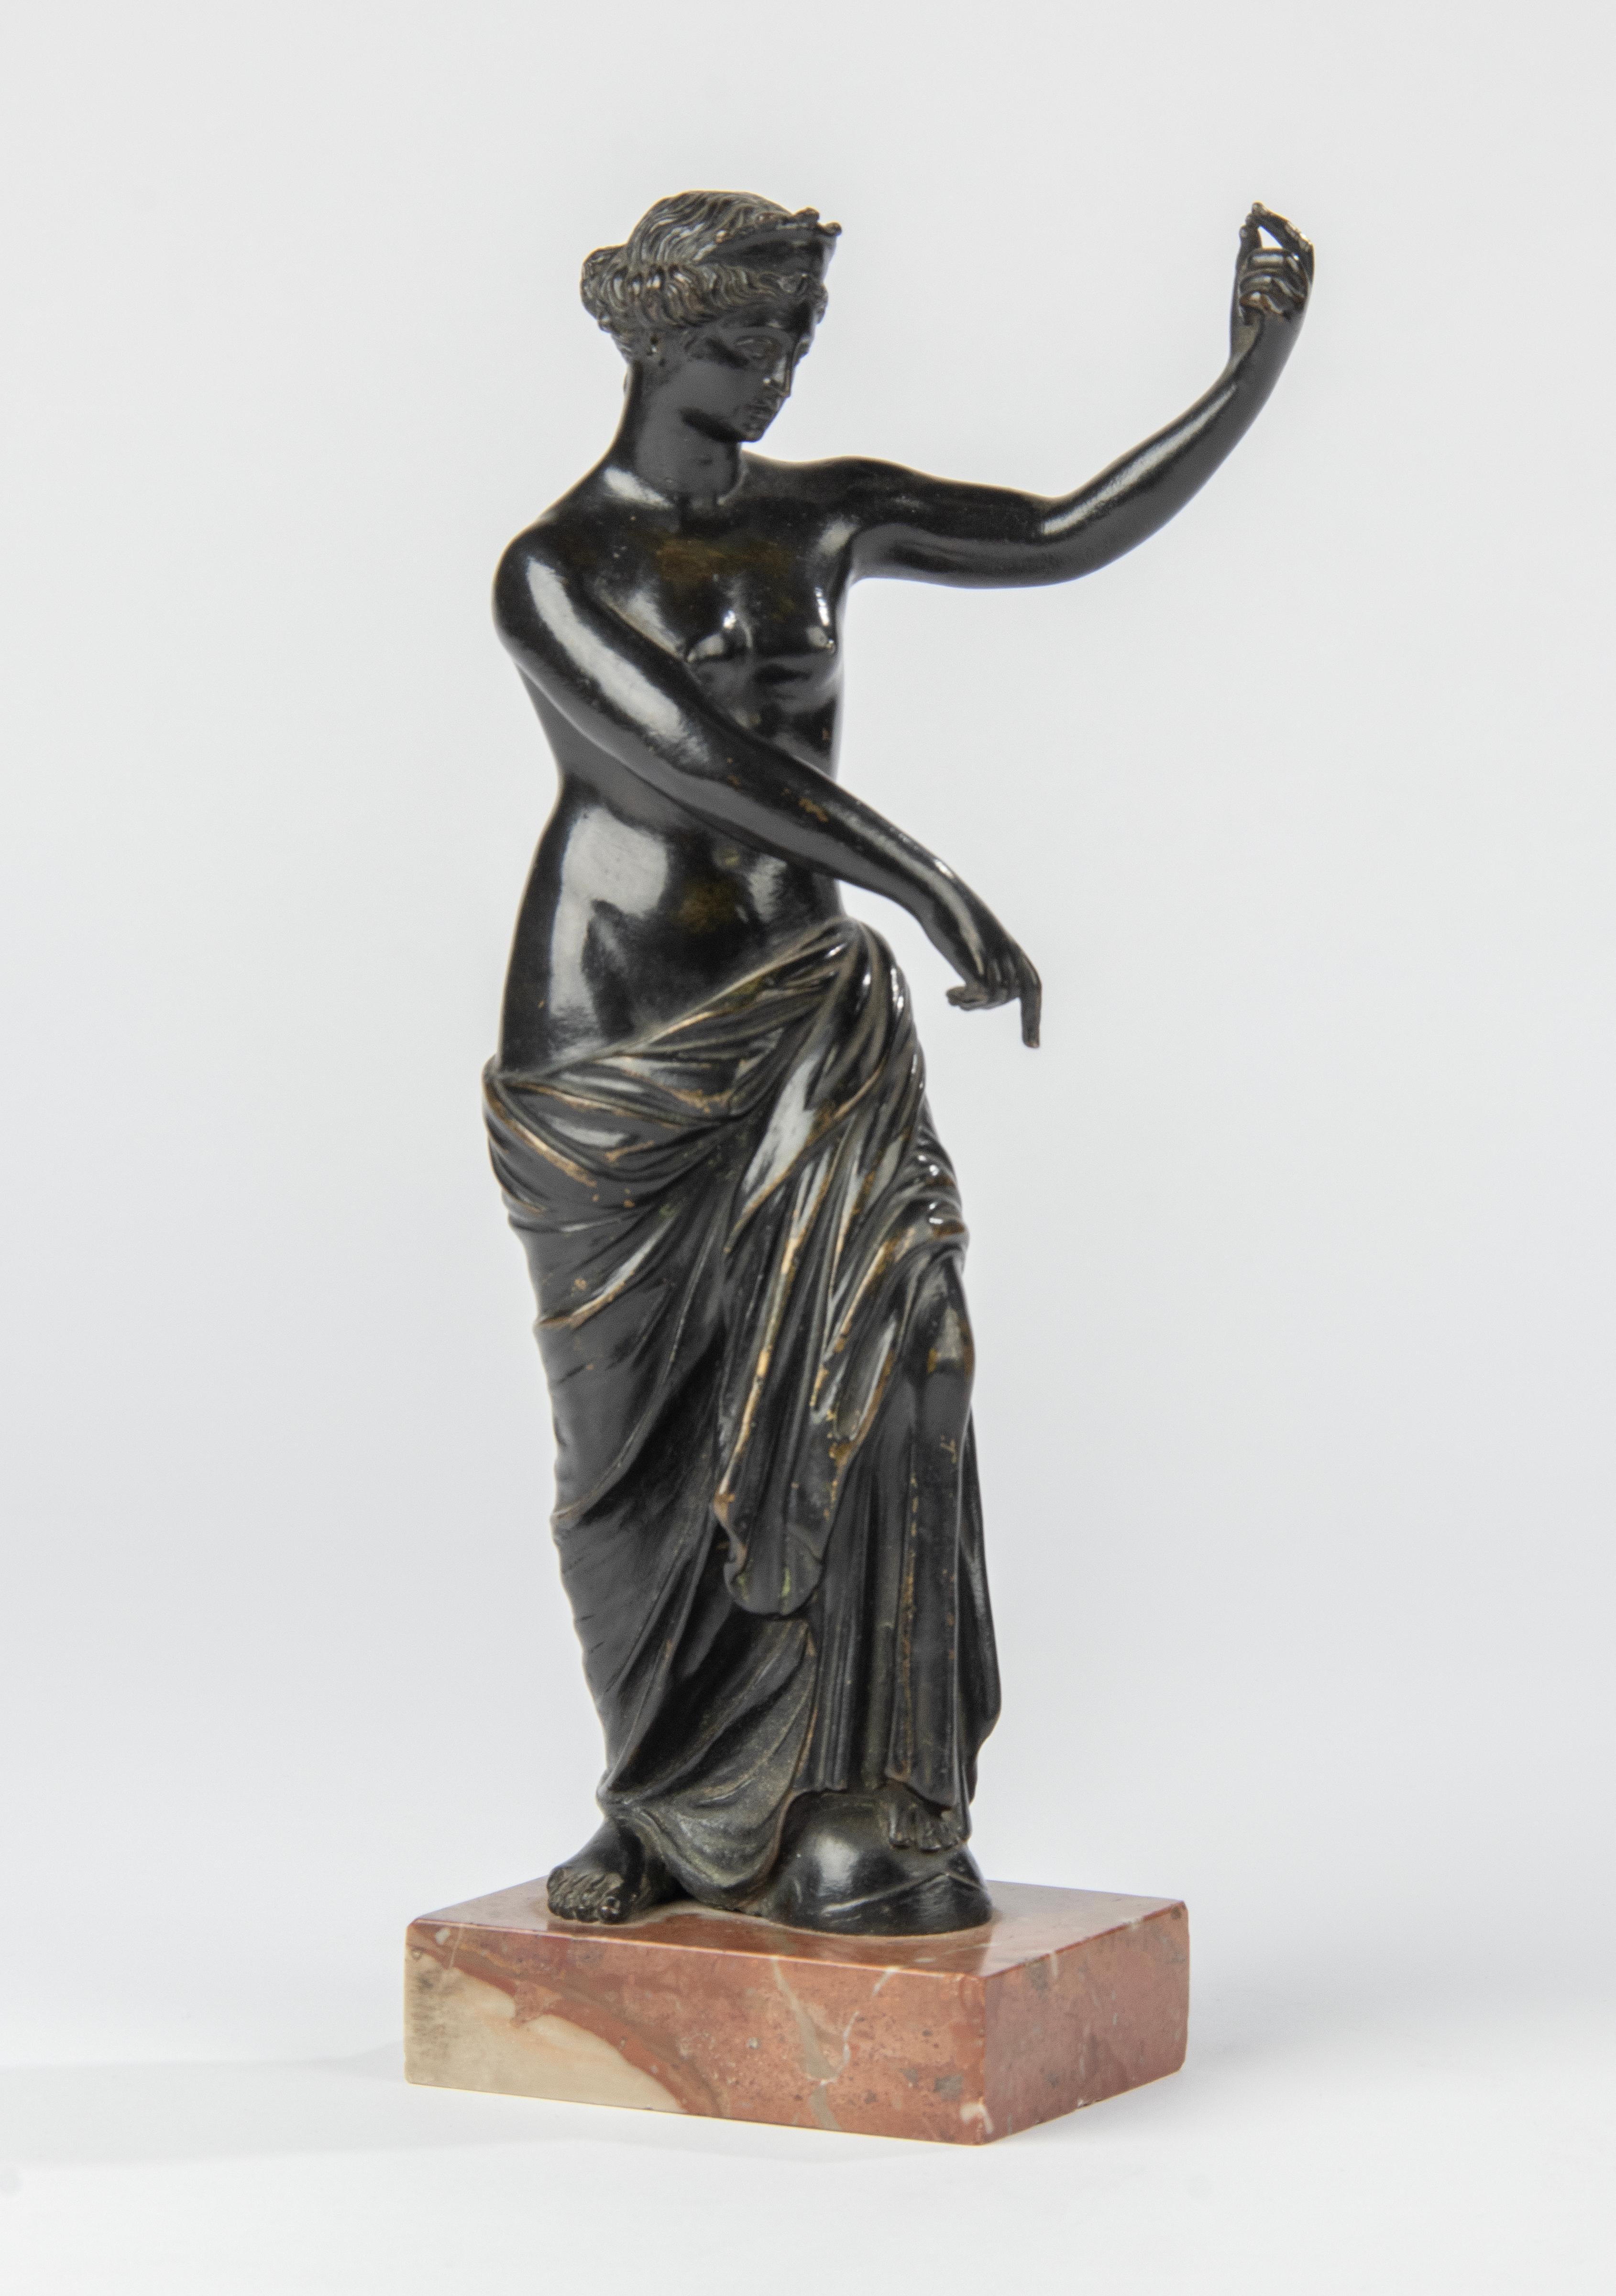 A beautiful antique bronze statue depicting Aphrodite / Venus, a goddess from classical antiquity. This bronze statue dates from circa 1870 and was made in France. The statue is not signed, it is a statue made after an antique example. 
L'Aphrodite